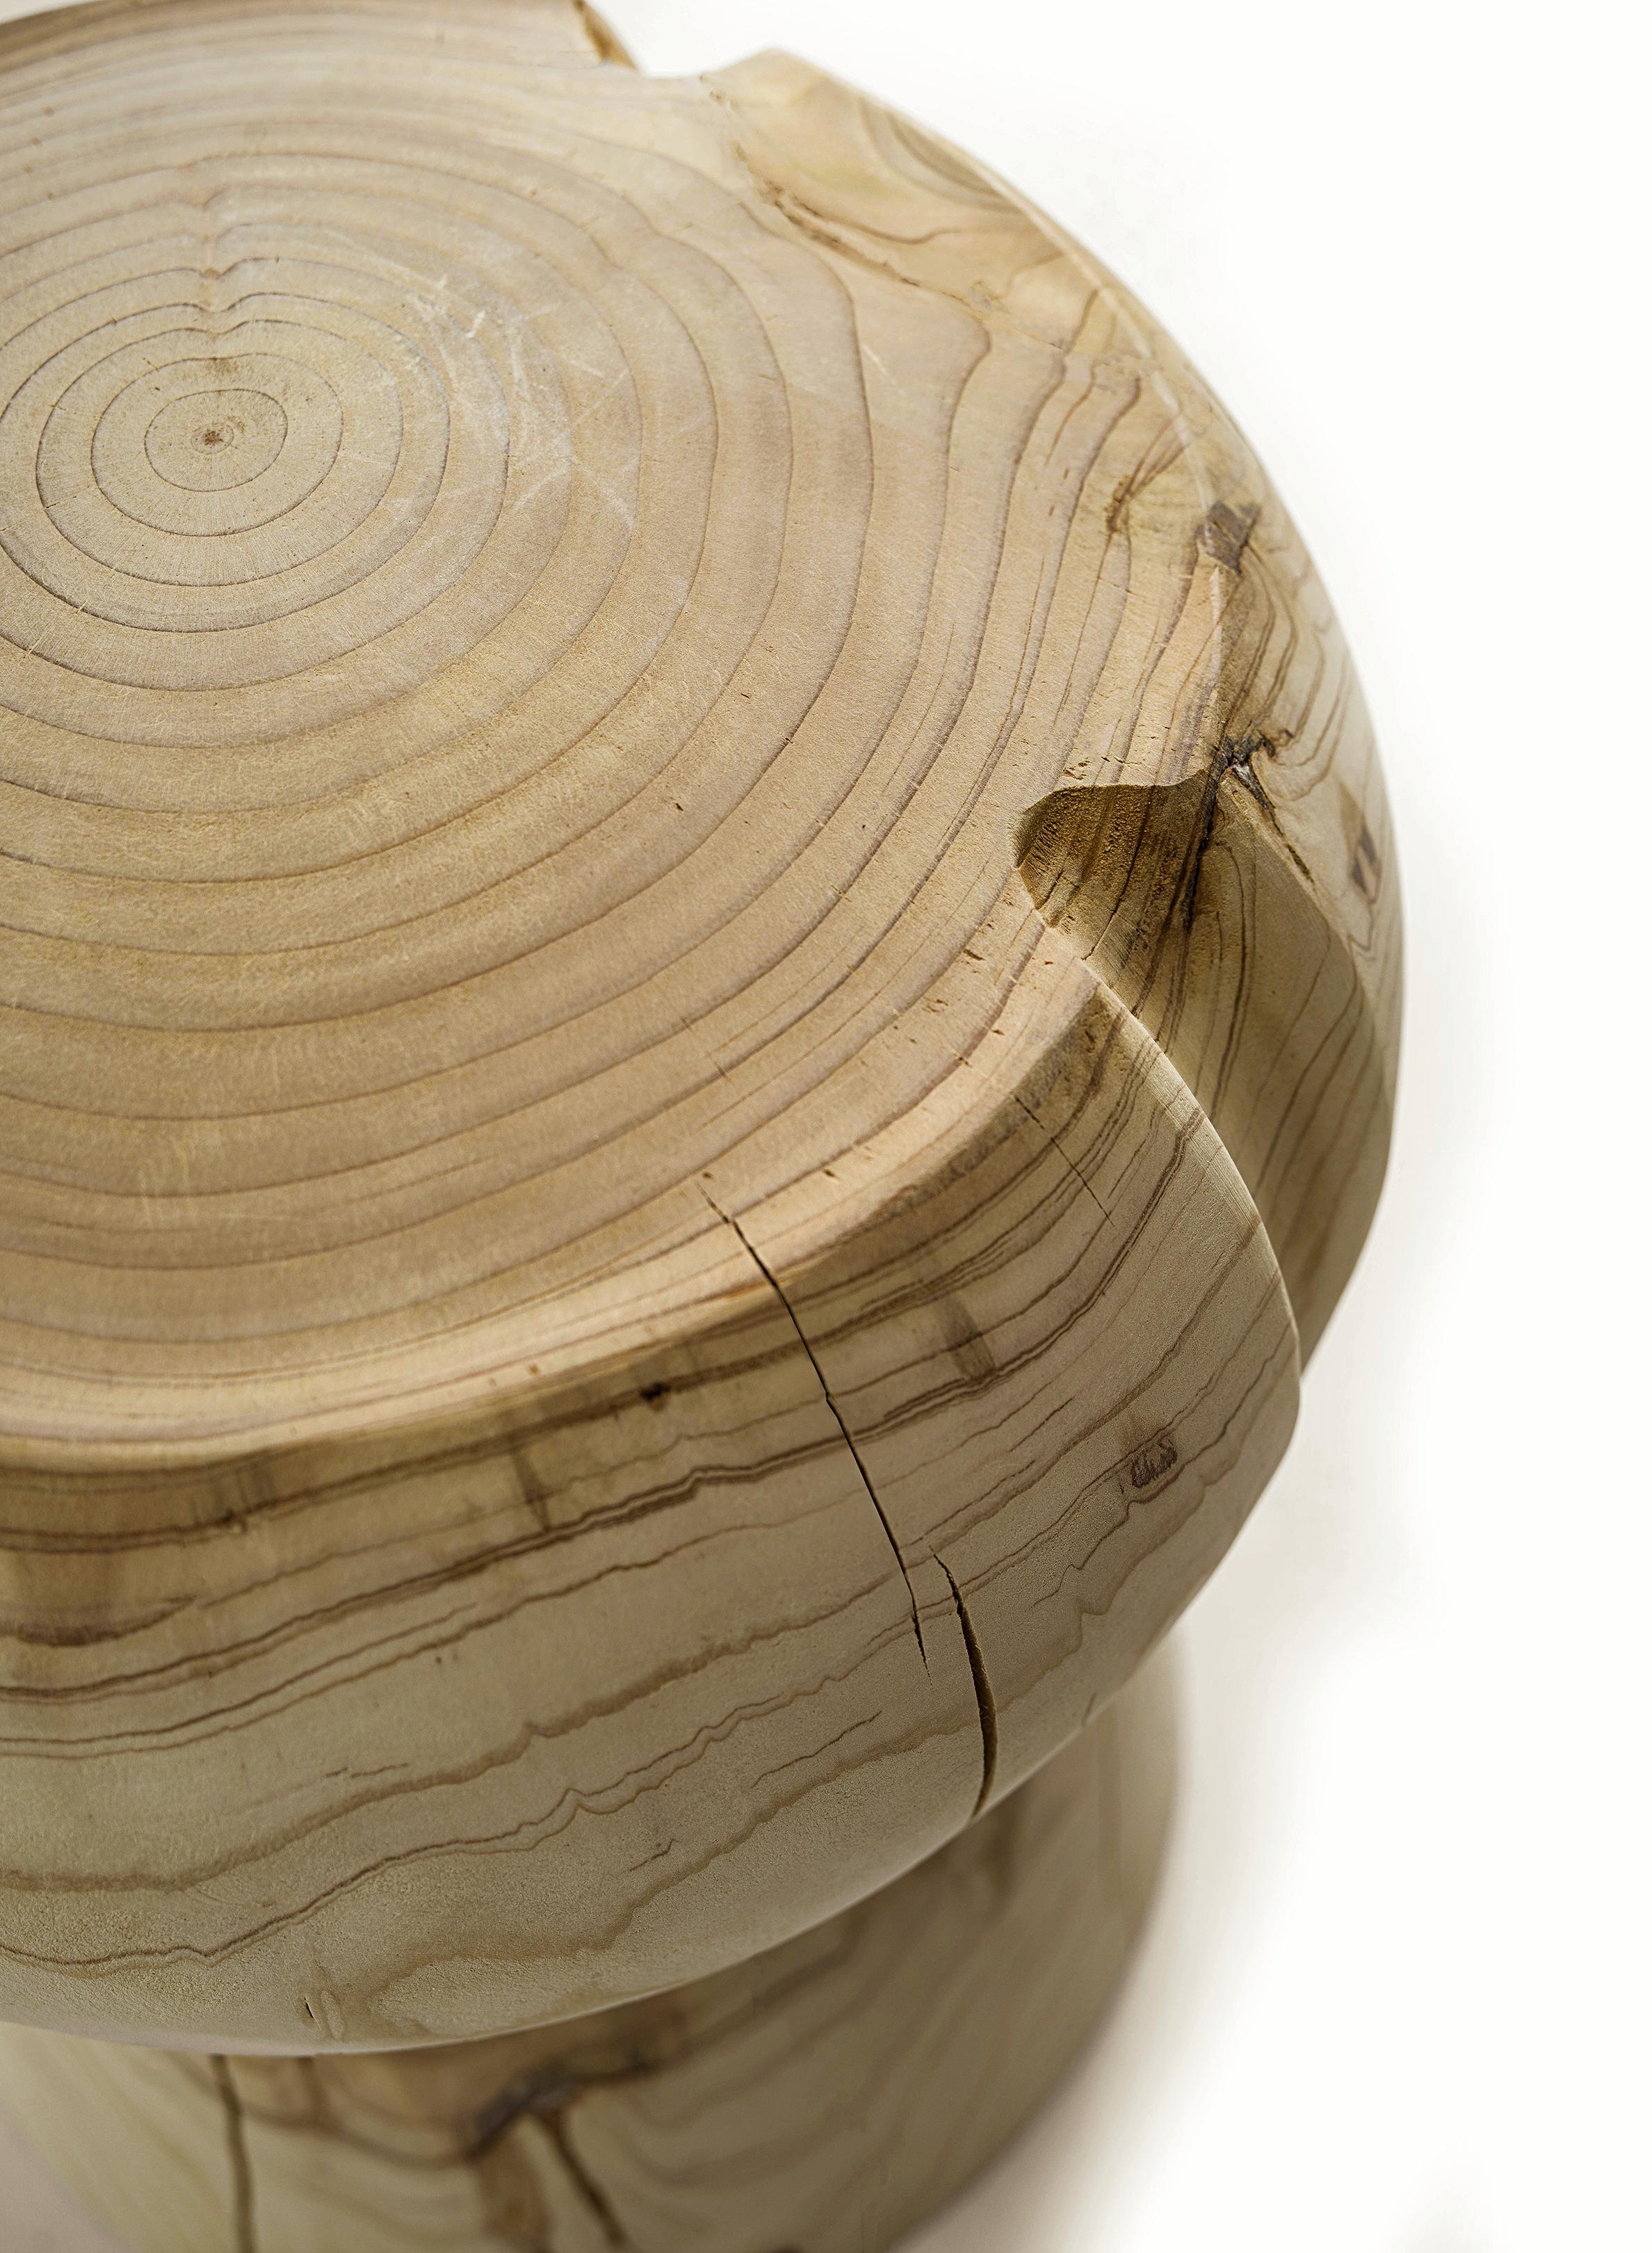 Stool made from a single block of scented cedar that is a representation of a large cork used in champagne bottles.